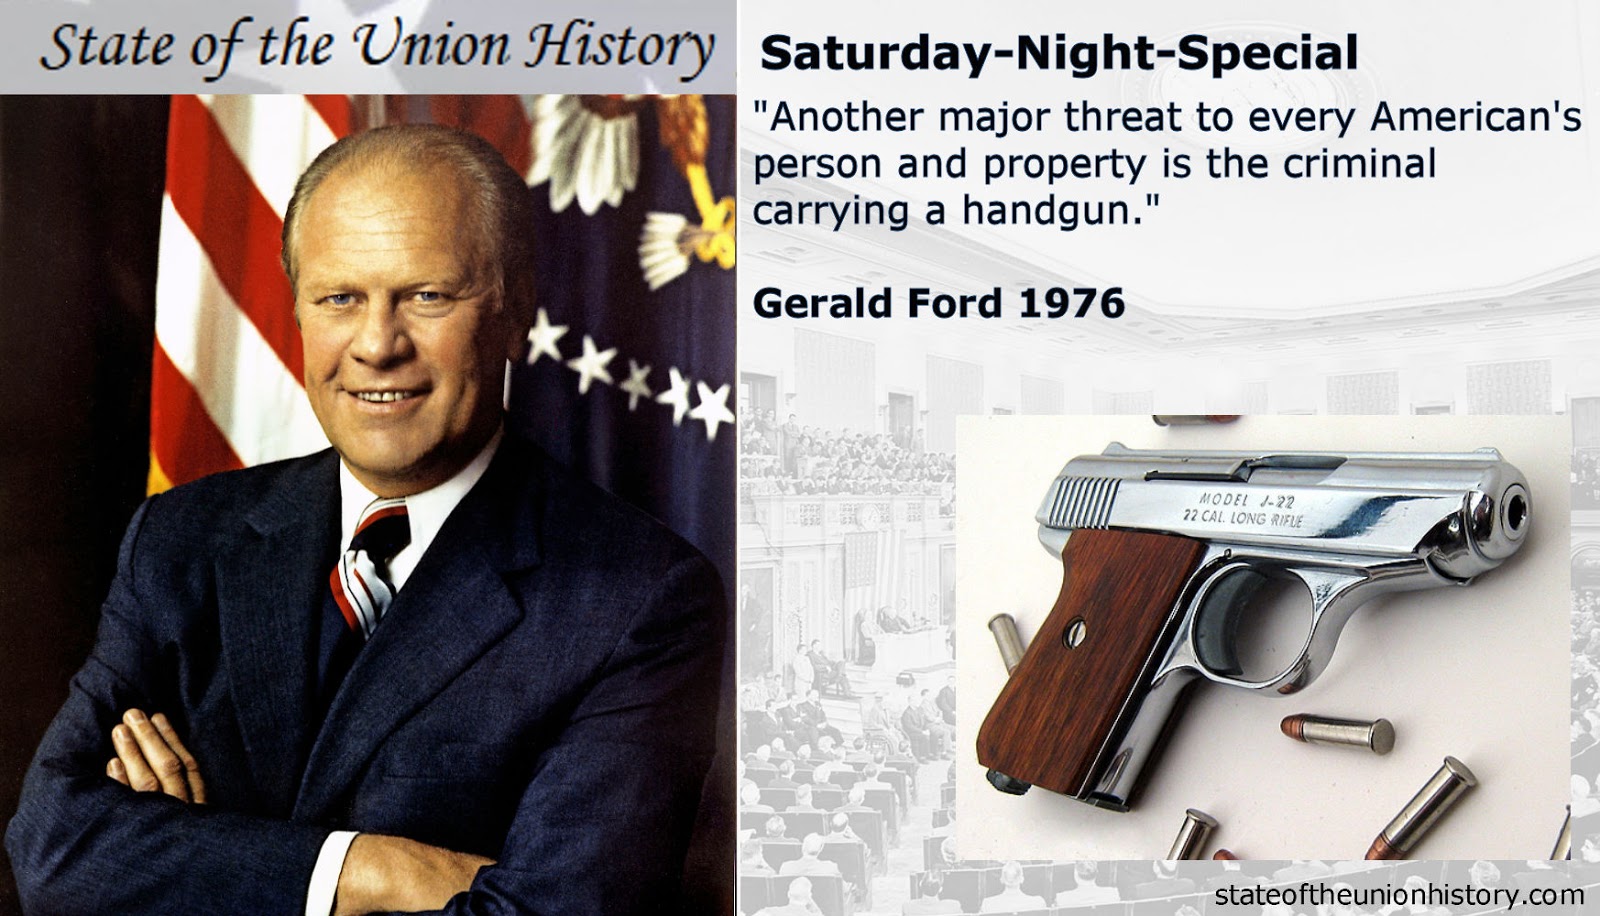 State of the Union History: 1976 Gerald Ford - Saturday-Night-Special